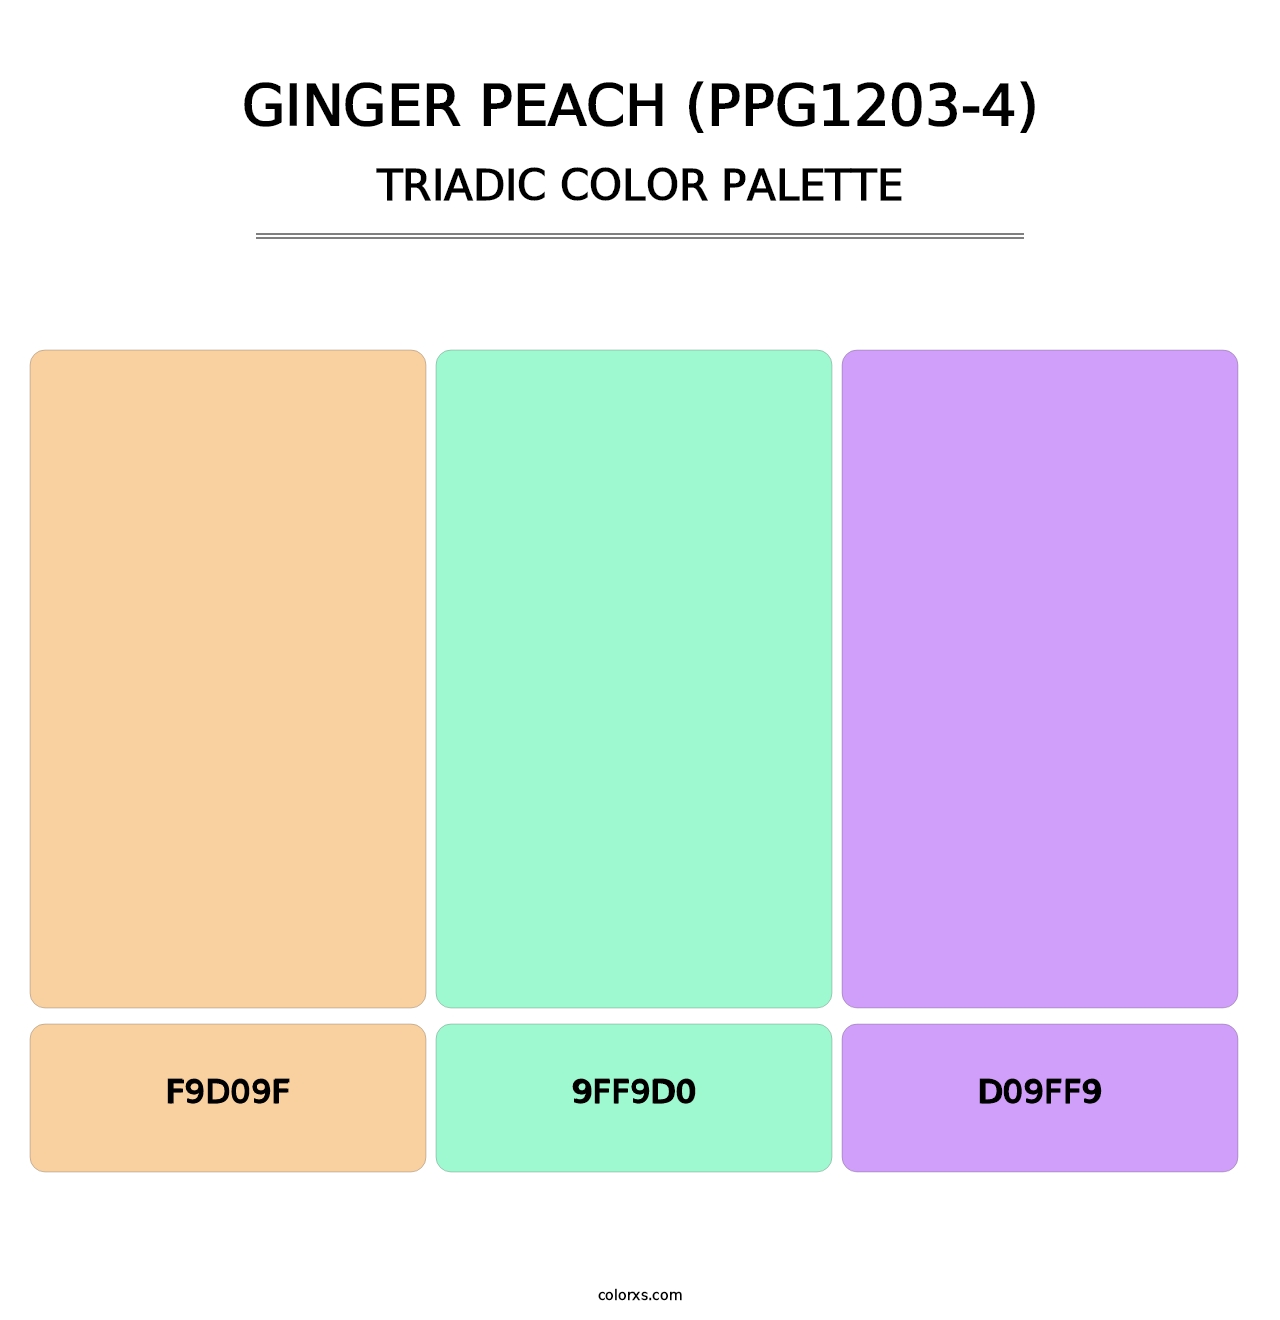 Ginger Peach (PPG1203-4) - Triadic Color Palette